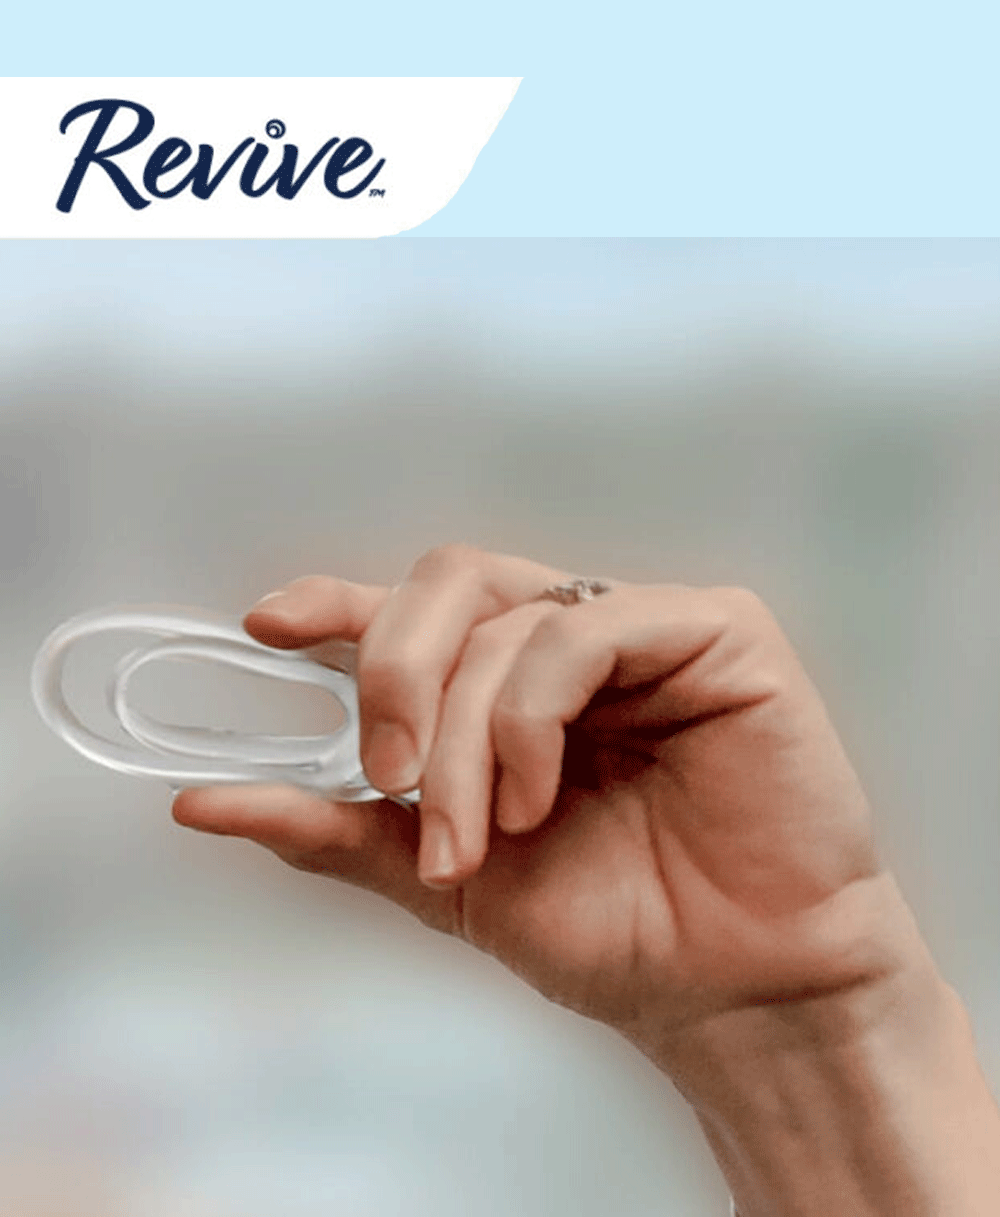 Revive is Available Over